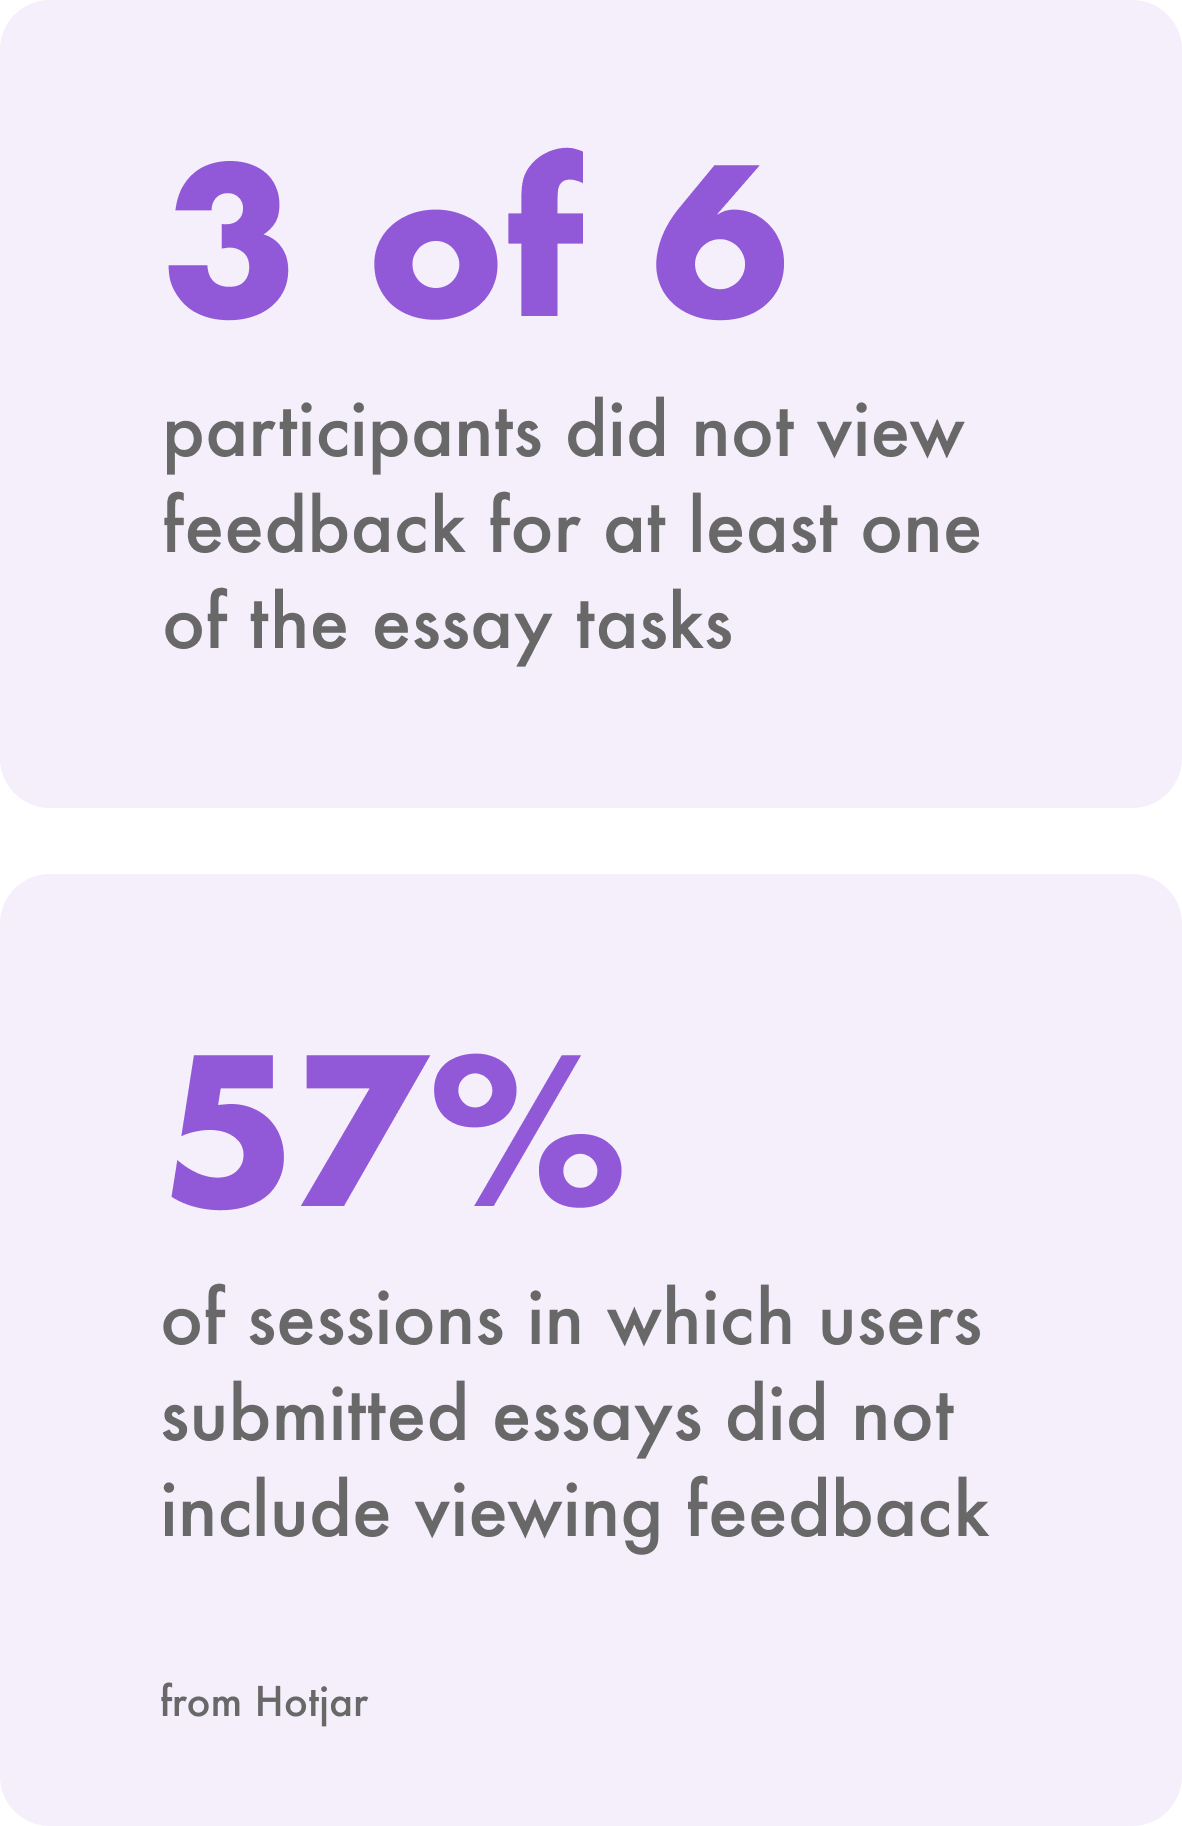 3 of 6 participants did not view feedback for at least one of the essay tasks; 57% of essays in which users submitted essays did not include viewing feedback (from Hotjar)